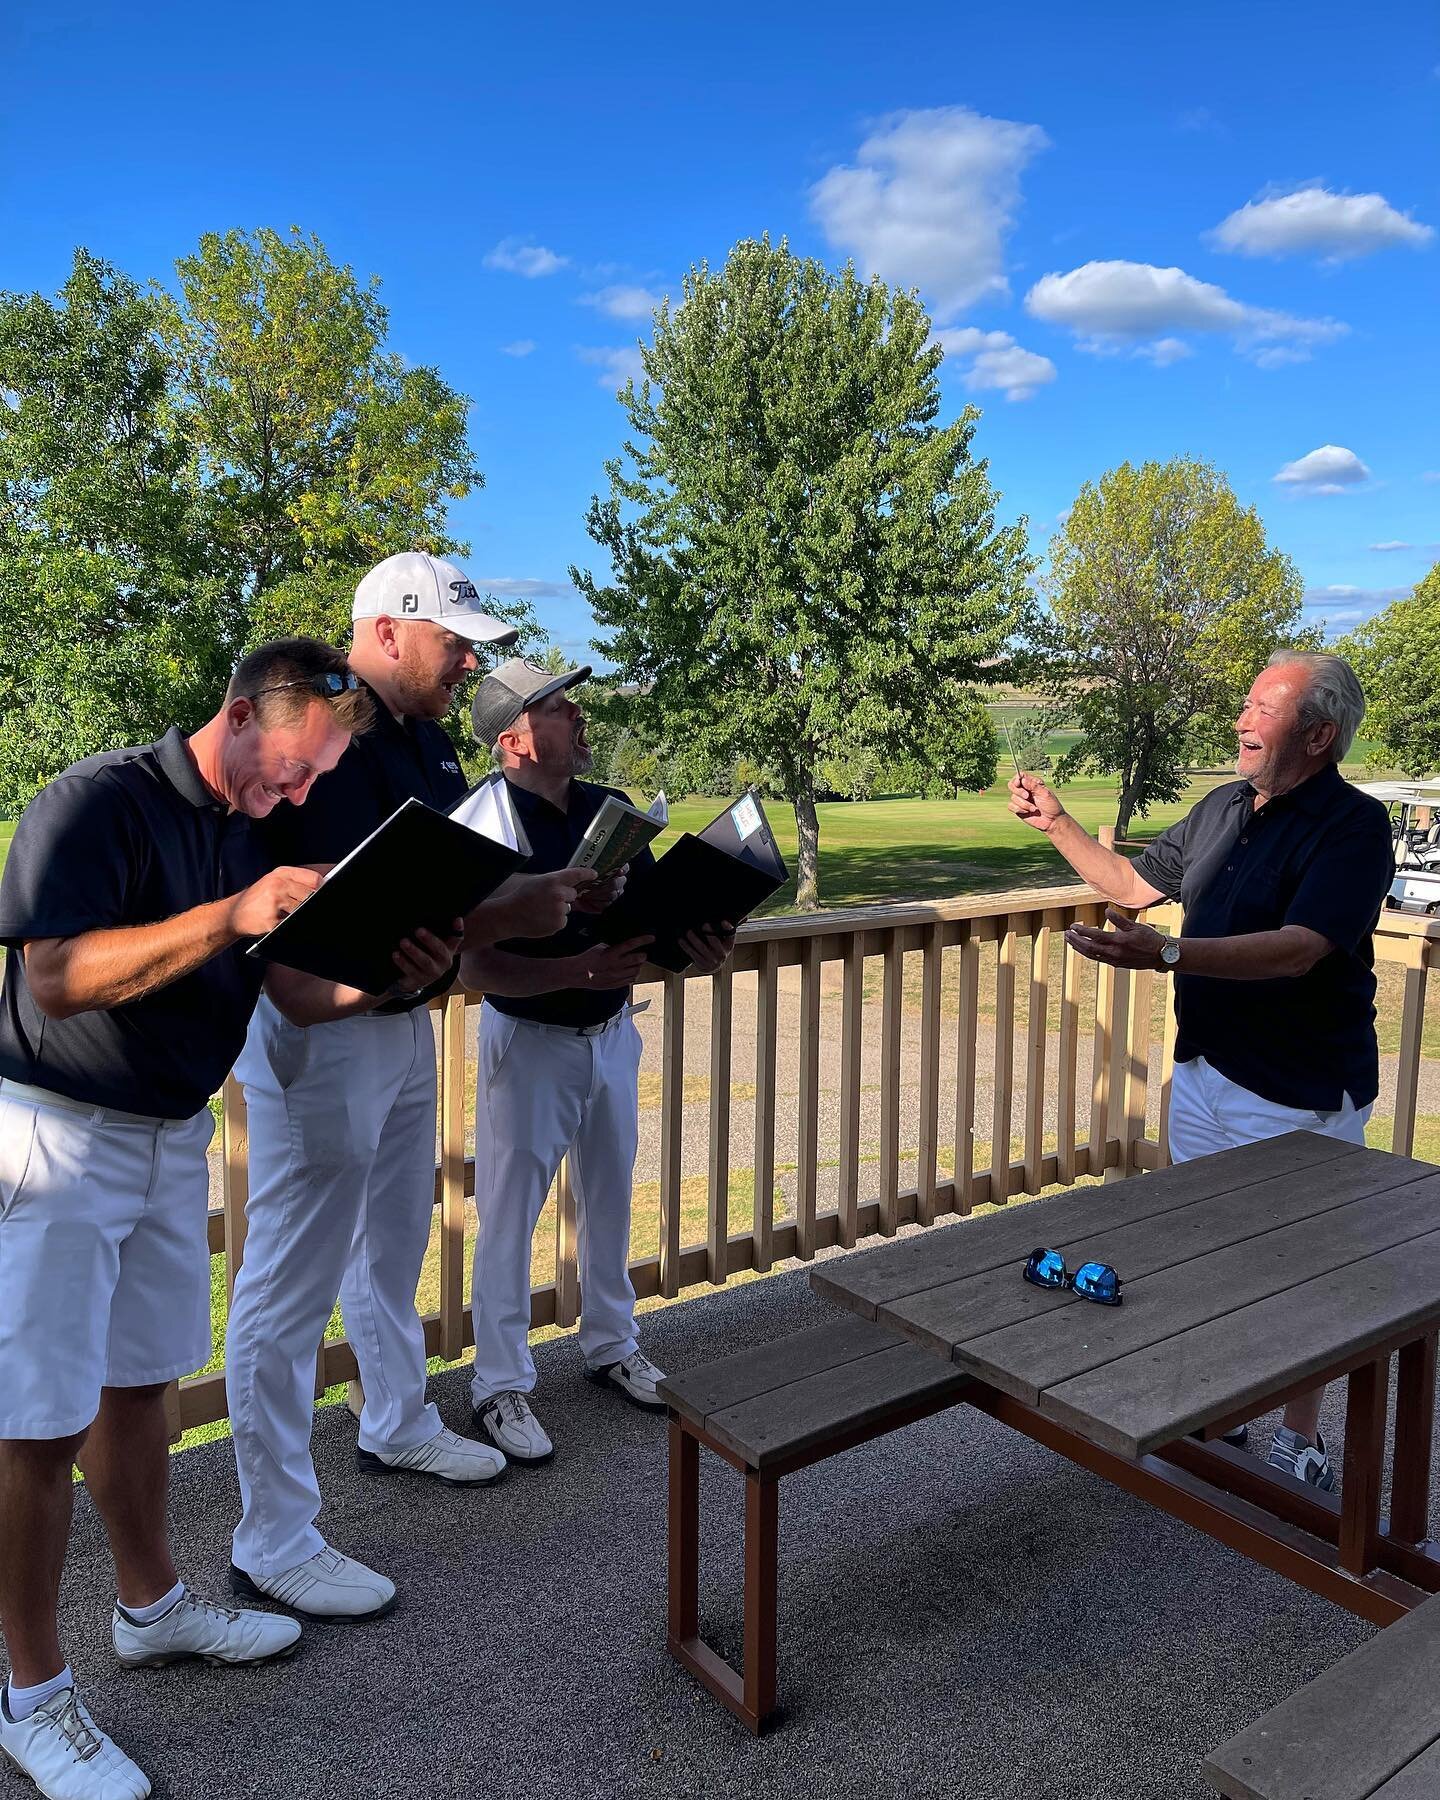 It was all fun and games Saturday at @richvalleygolfmn for MVMC&rsquo;s fifth annual charity golf outing. This year&rsquo;s event netted $1,710 for The Link (thelinkmn.org).

A big thanks to Rich Valley Golf, not only for hosting this raucous event e